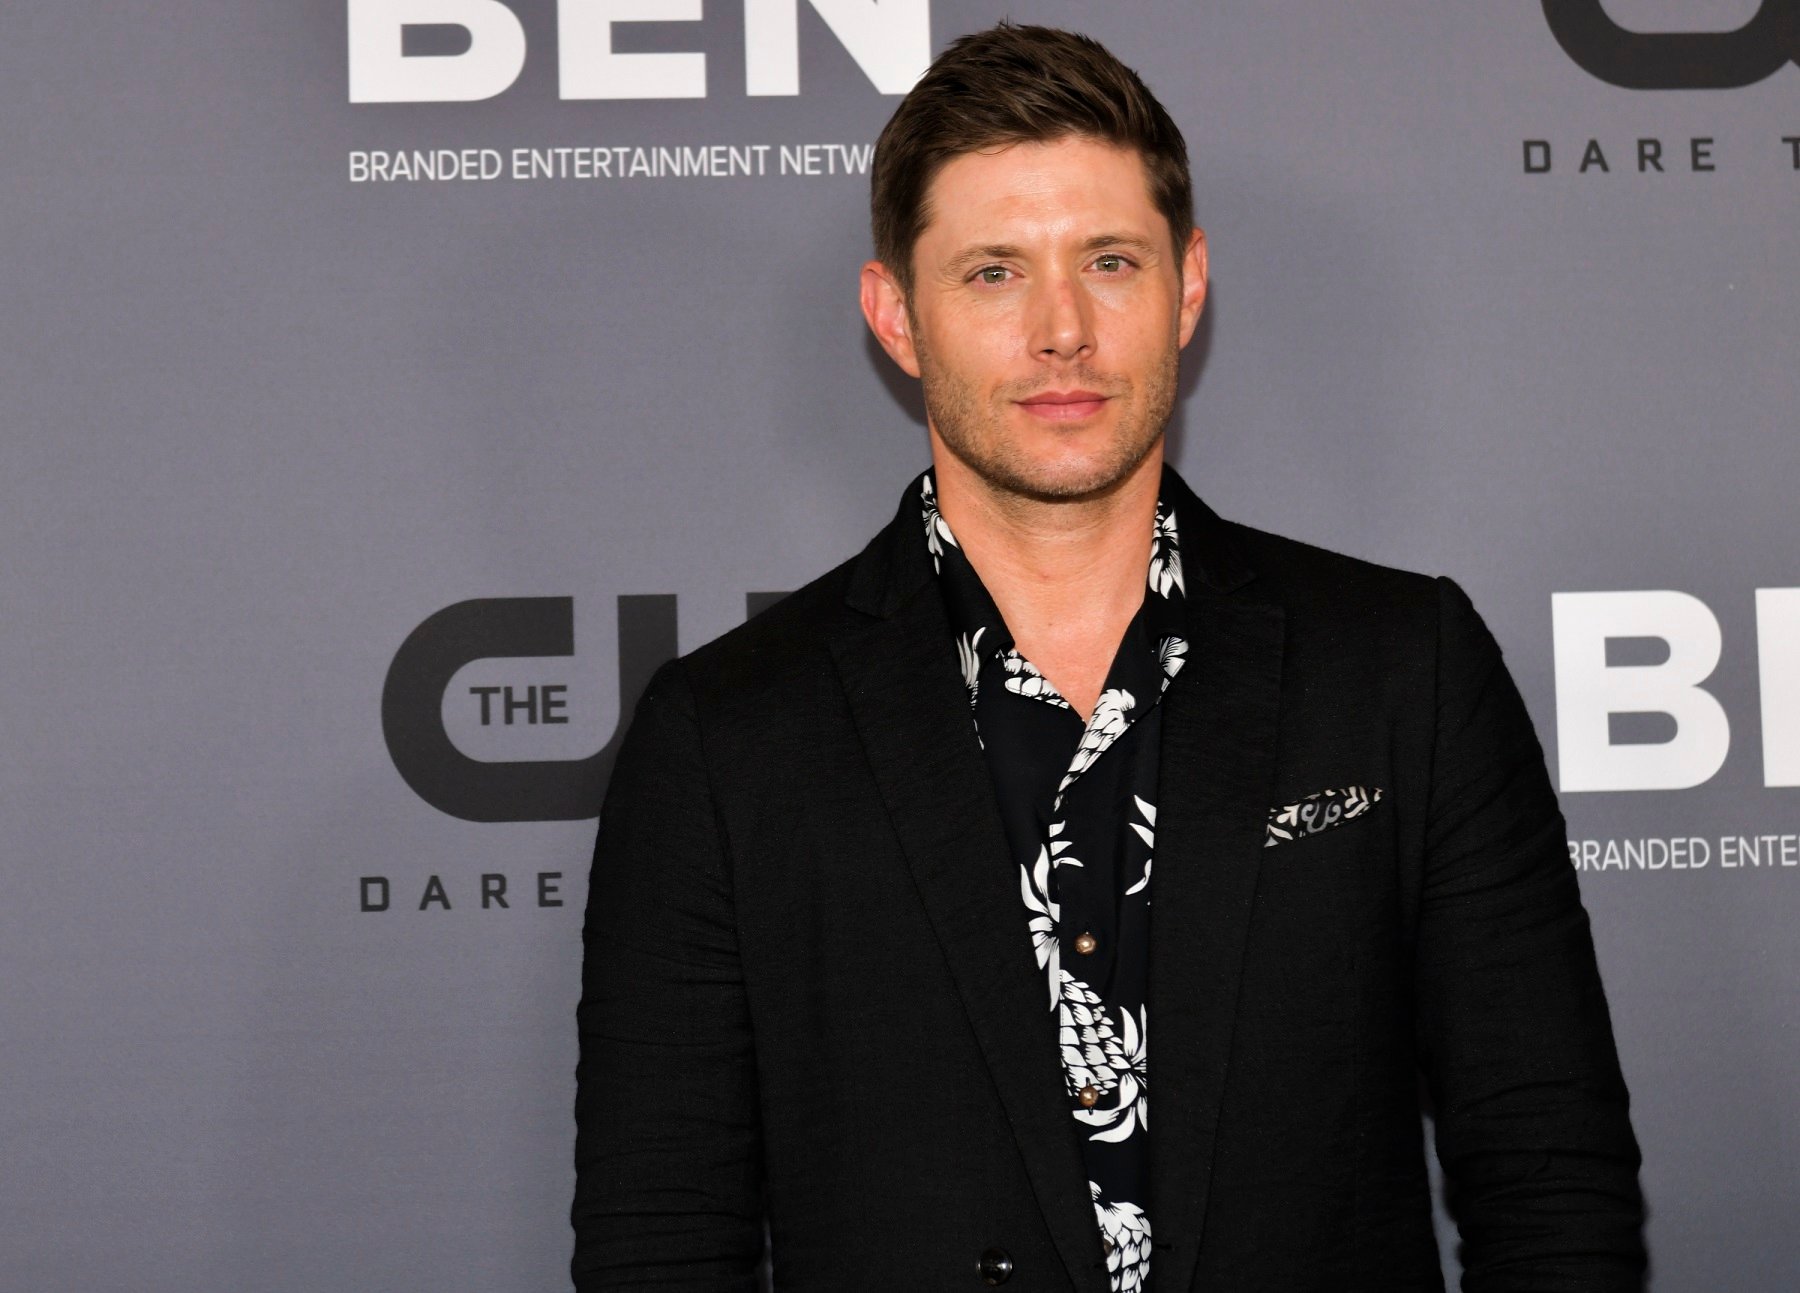 Jensen Ackles Reminded of His ‘Days of Our Lives’ Days by Jared Padalecki